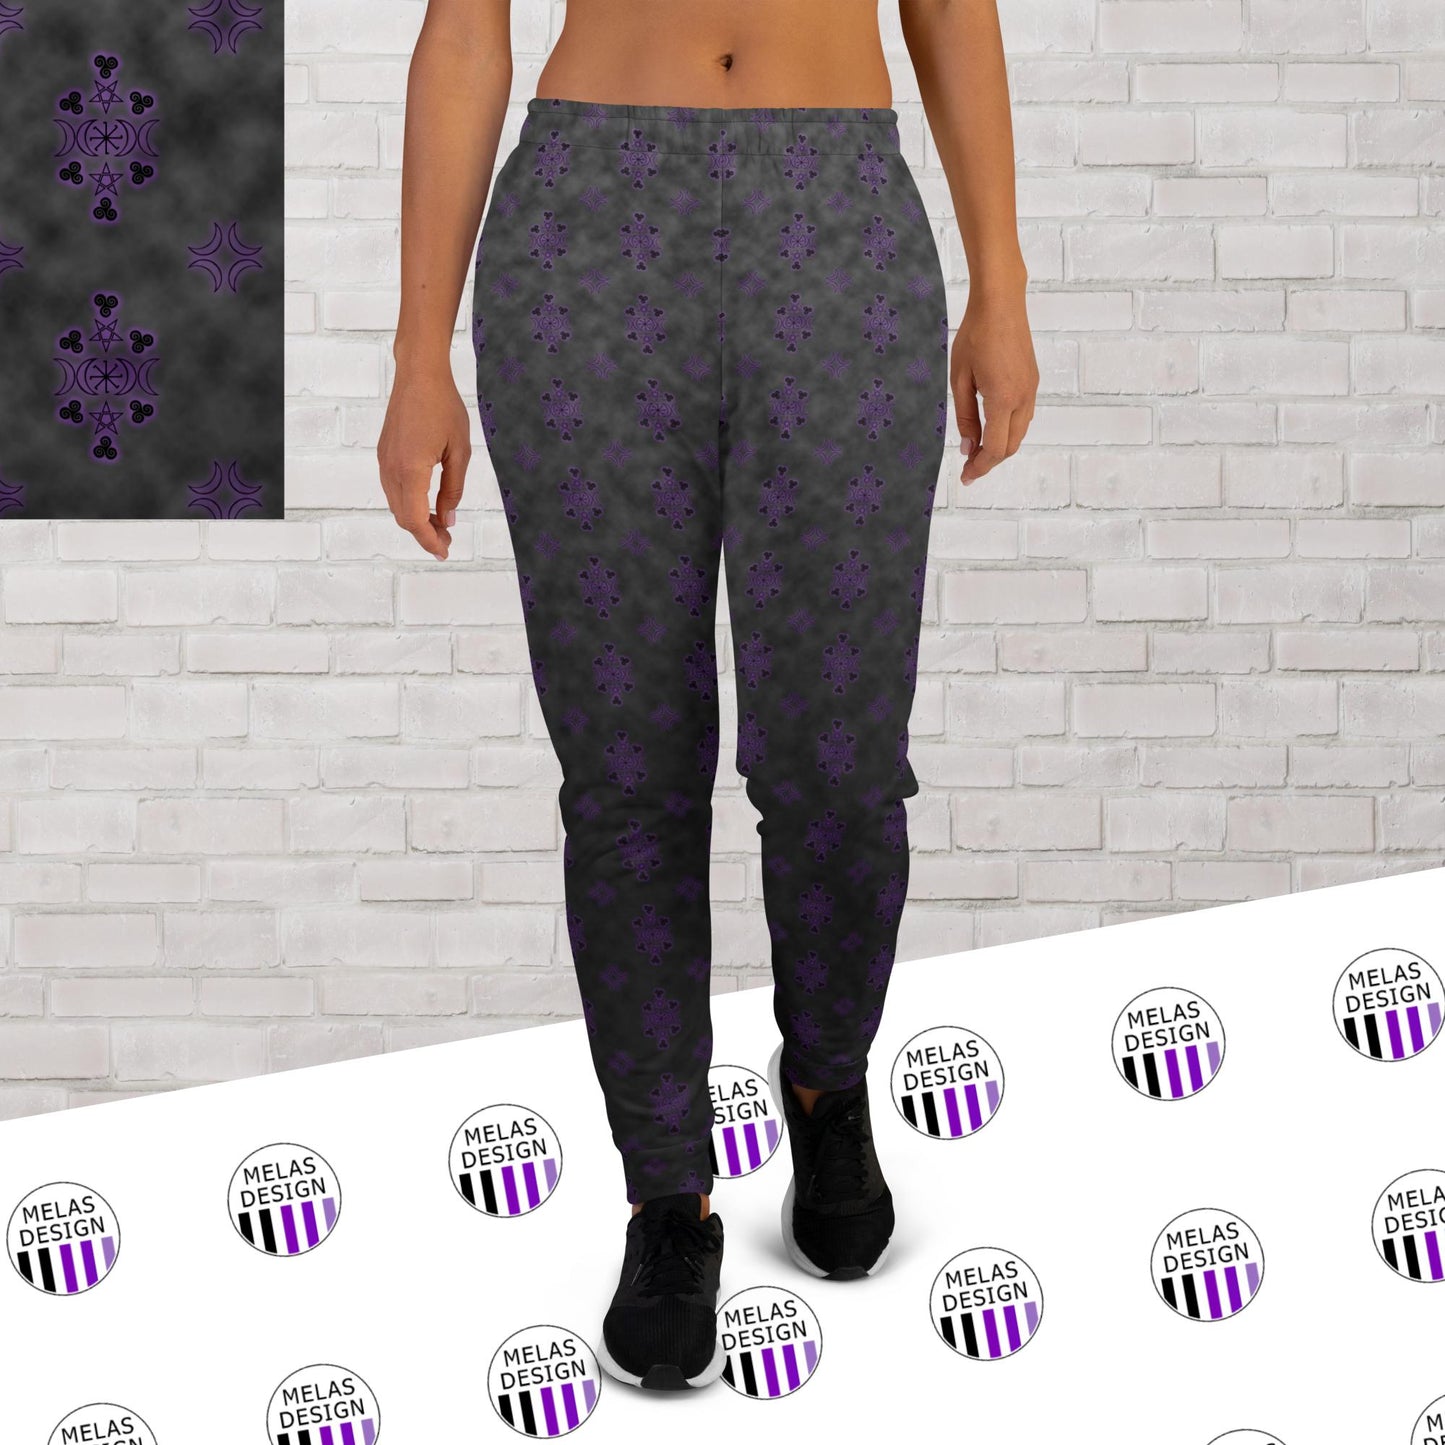 Witchy Ombre Cloudy Women's Joggers; Melasdesign; alternative; pagan; witchy; witch aesthetic; gothic; fashion; style; joggers; small business; pagan symbols; pentagram; crescent moons; wheel of the moon; witch knots